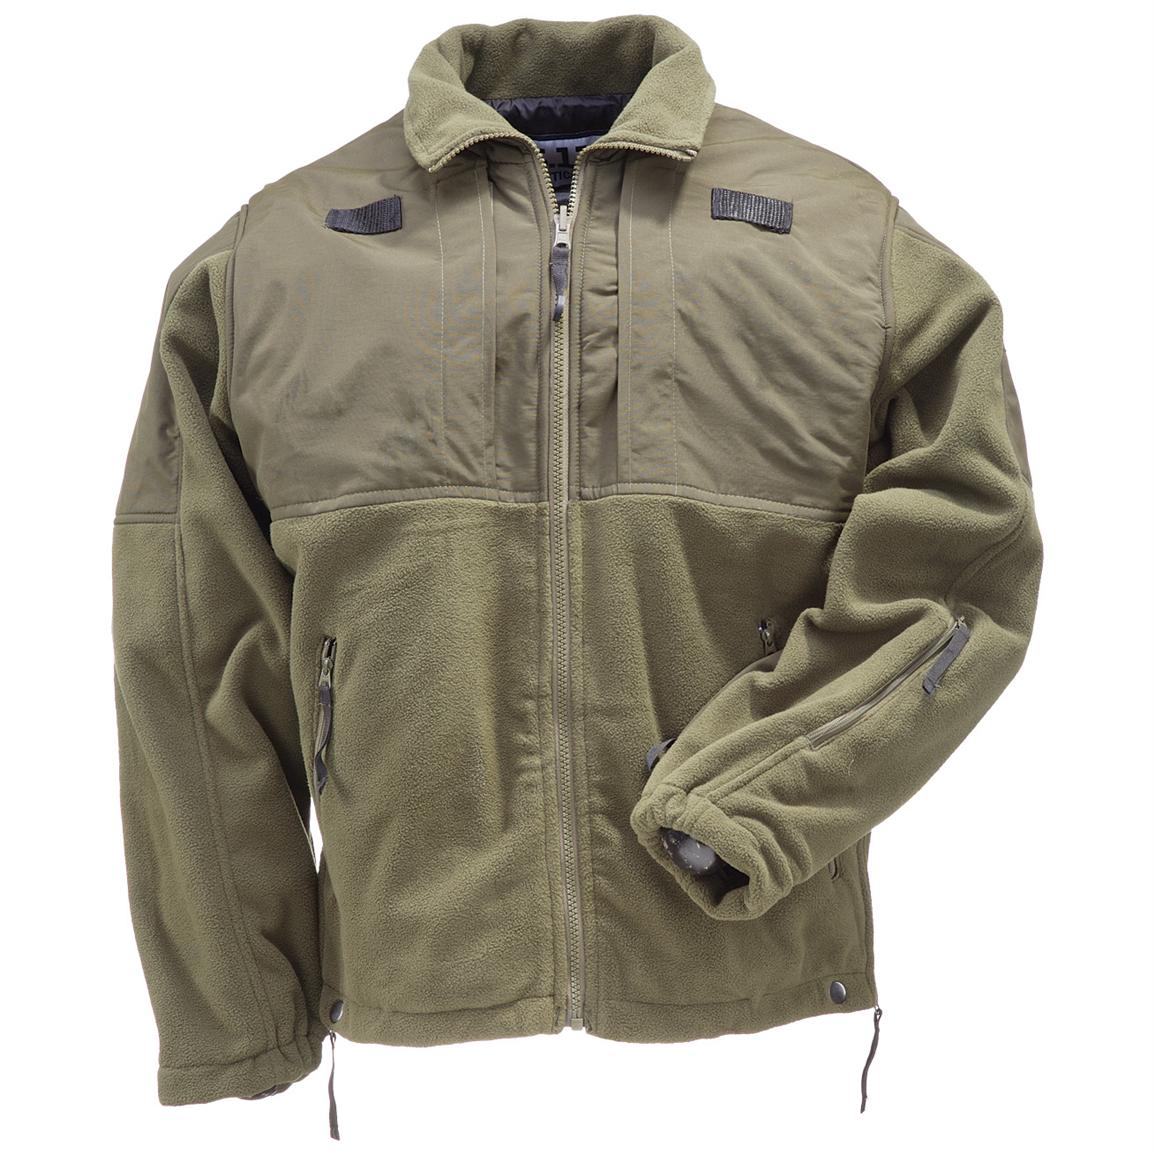 5.11 Tactical® Fleece - 165473, Tactical Clothing at Sportsman's Guide